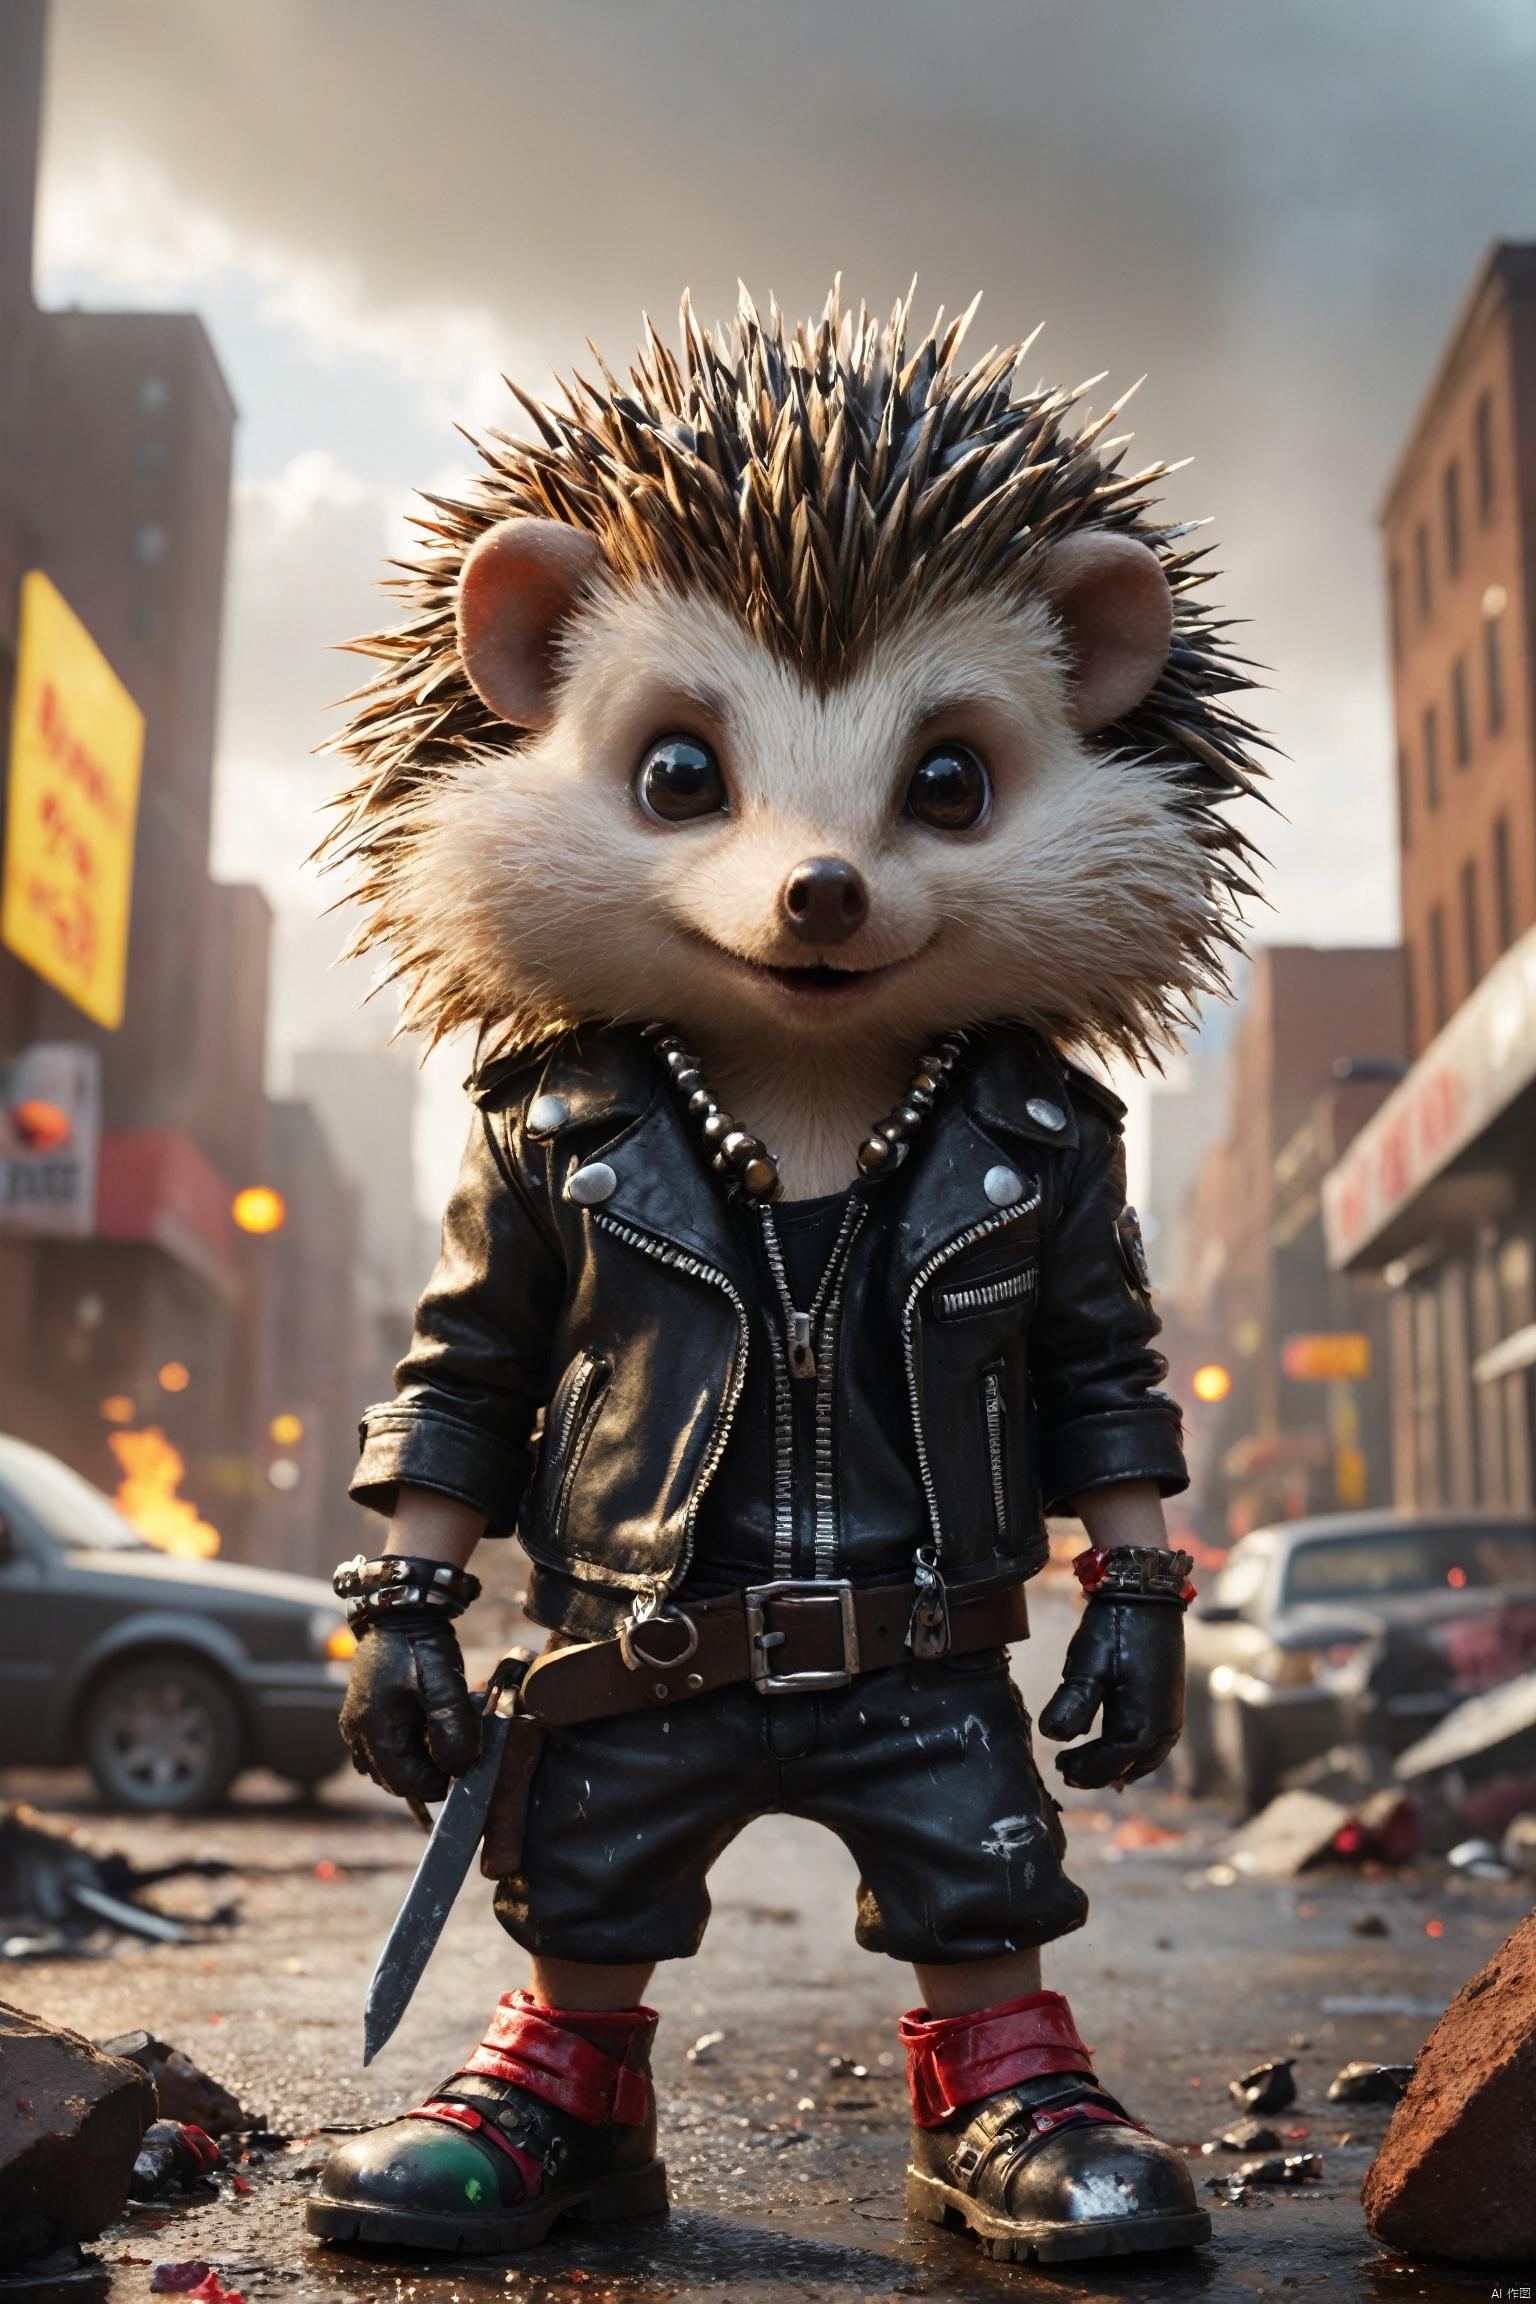 A groundbreaking punk-rock album cover featuring a fearless hedgehog rebel. It sports a mohawk, spiked leather gloves, and a studded collar, embodying the spirit of nonconformity. The tiny, colorful cityscape in the background burns and crumbles as it experiences the hedgehog's rampage. The chaotic blend of urban decay and gritty textures creates the perfect punk atmosphere, reflecting the hedgehog's unyielding rebellion and individuality. 
many details, extreme detailed, full of details,
Wide range of colors. Insane quality. Insane resolution. Insane details. Masterpiece. 32k resolution.